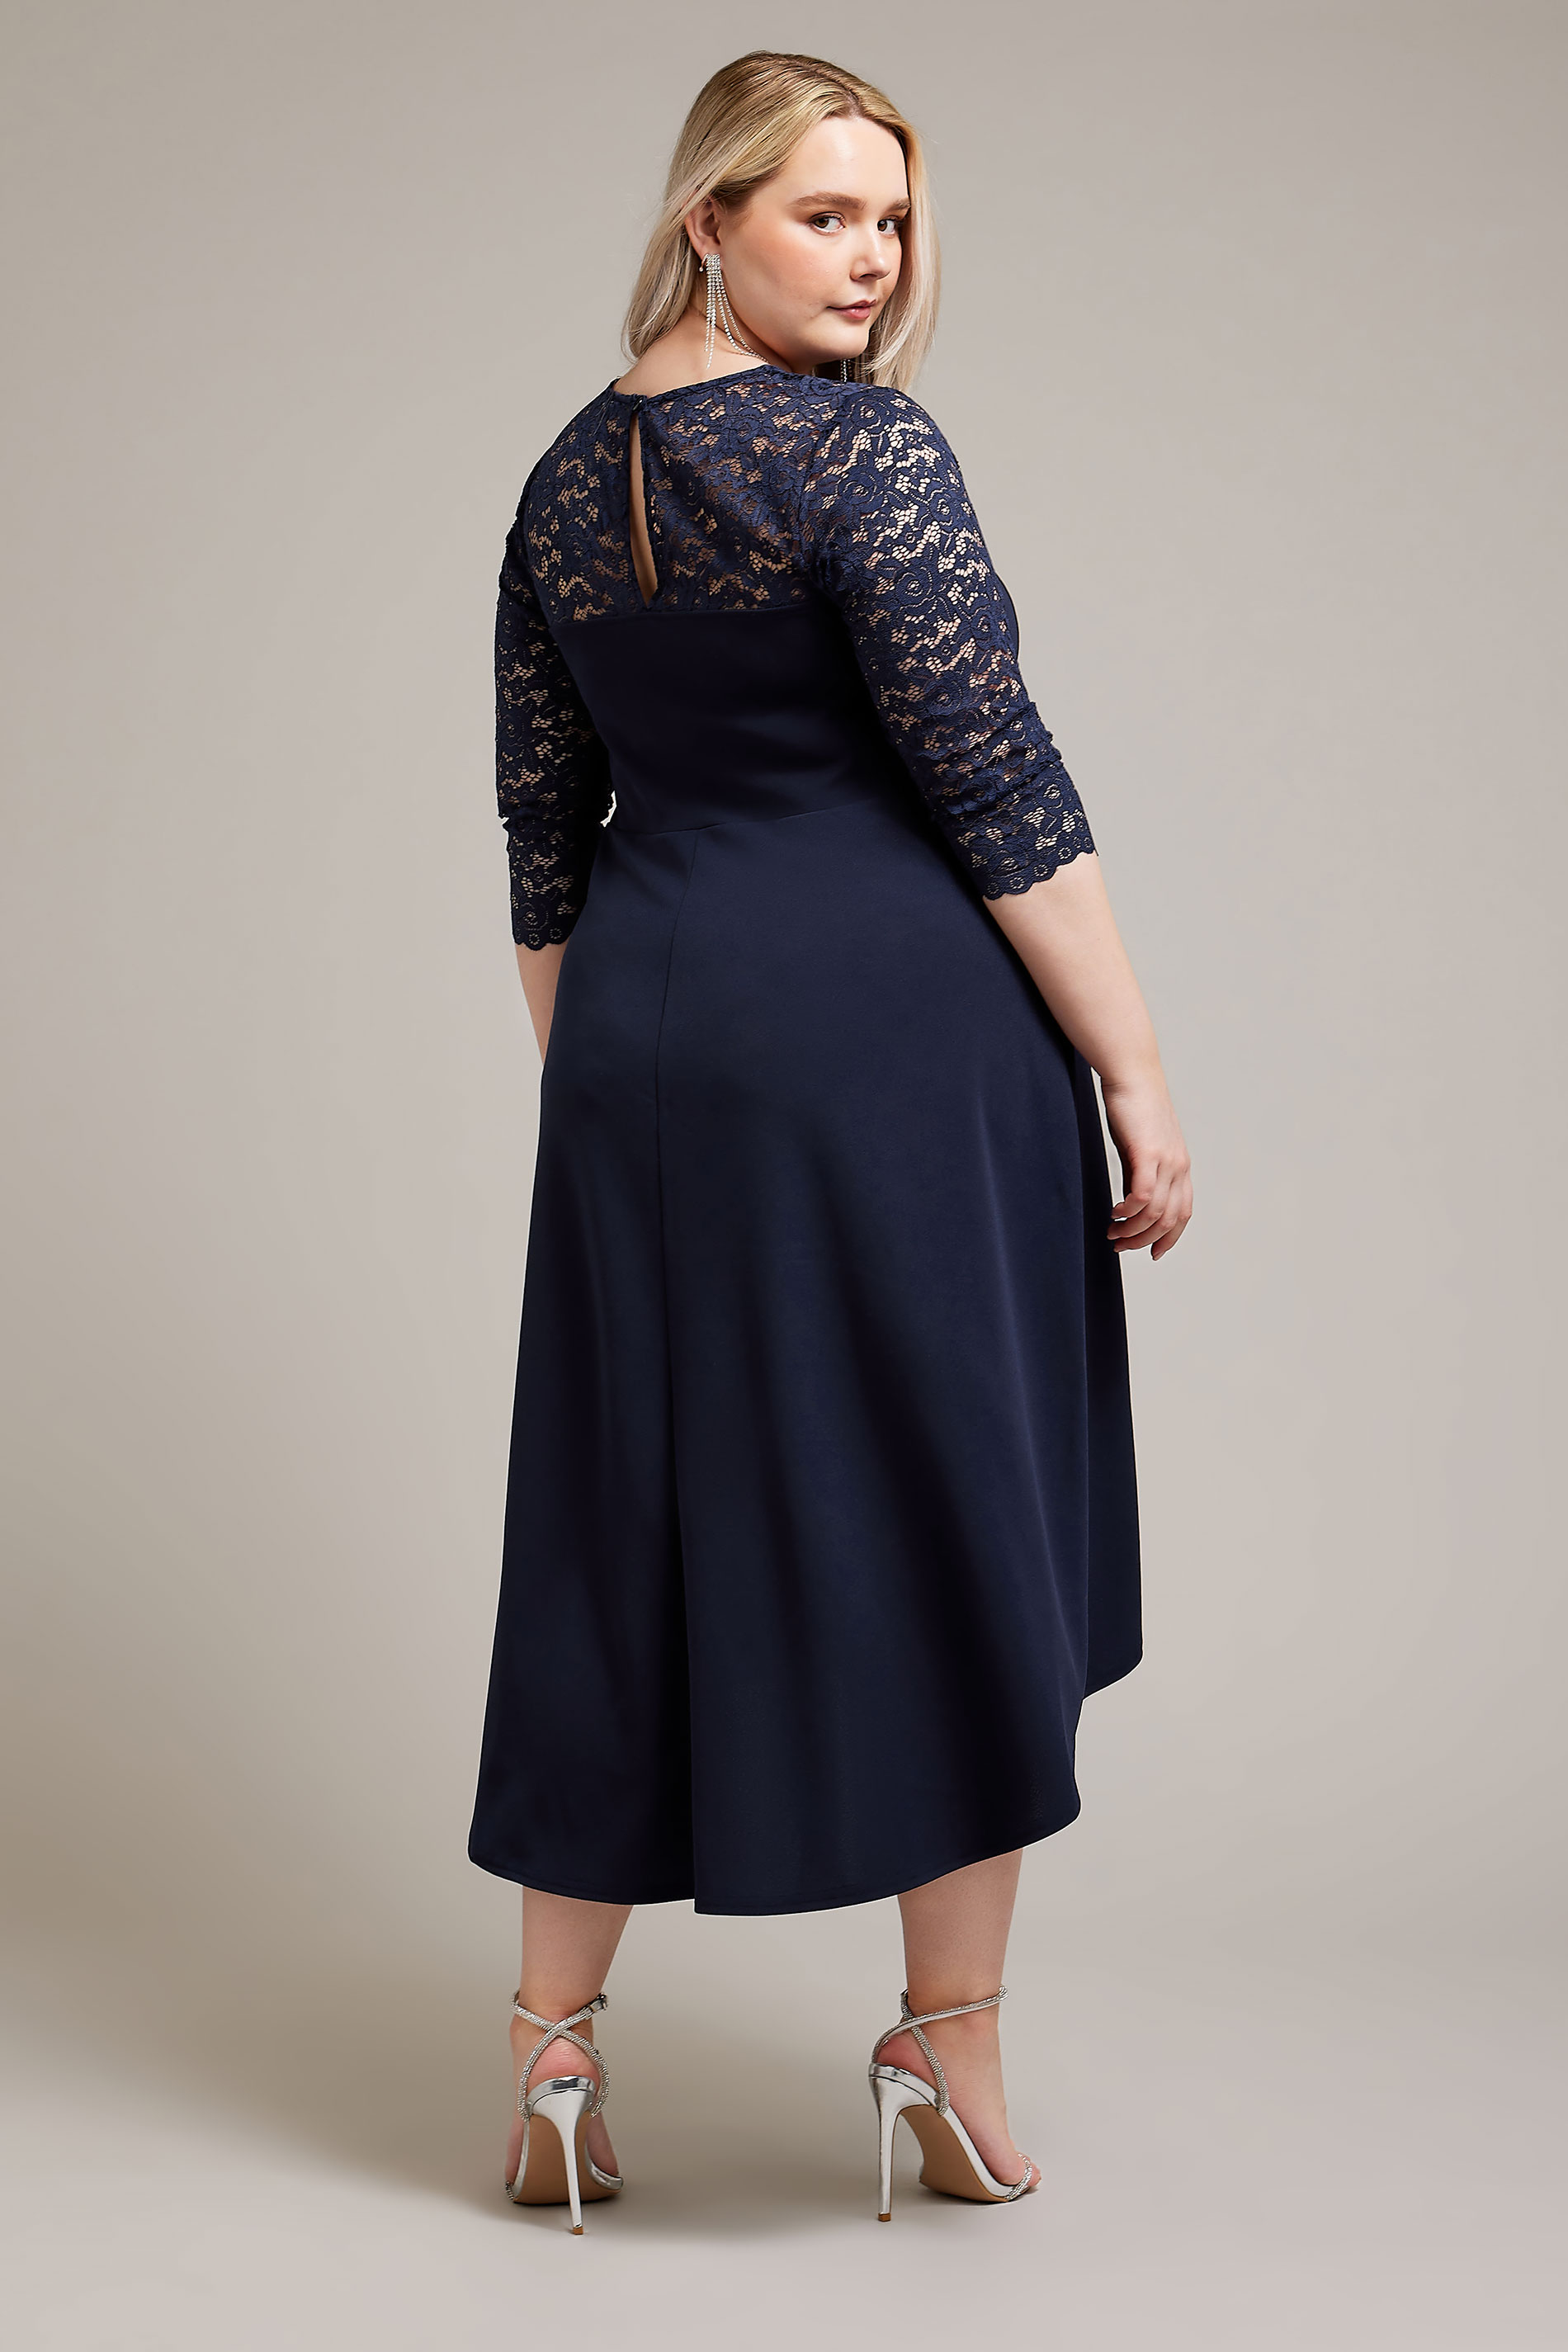 YOURS LONDON Plus Size Navy Blue Lace Sweetheart Dress | Yours Clothing 3